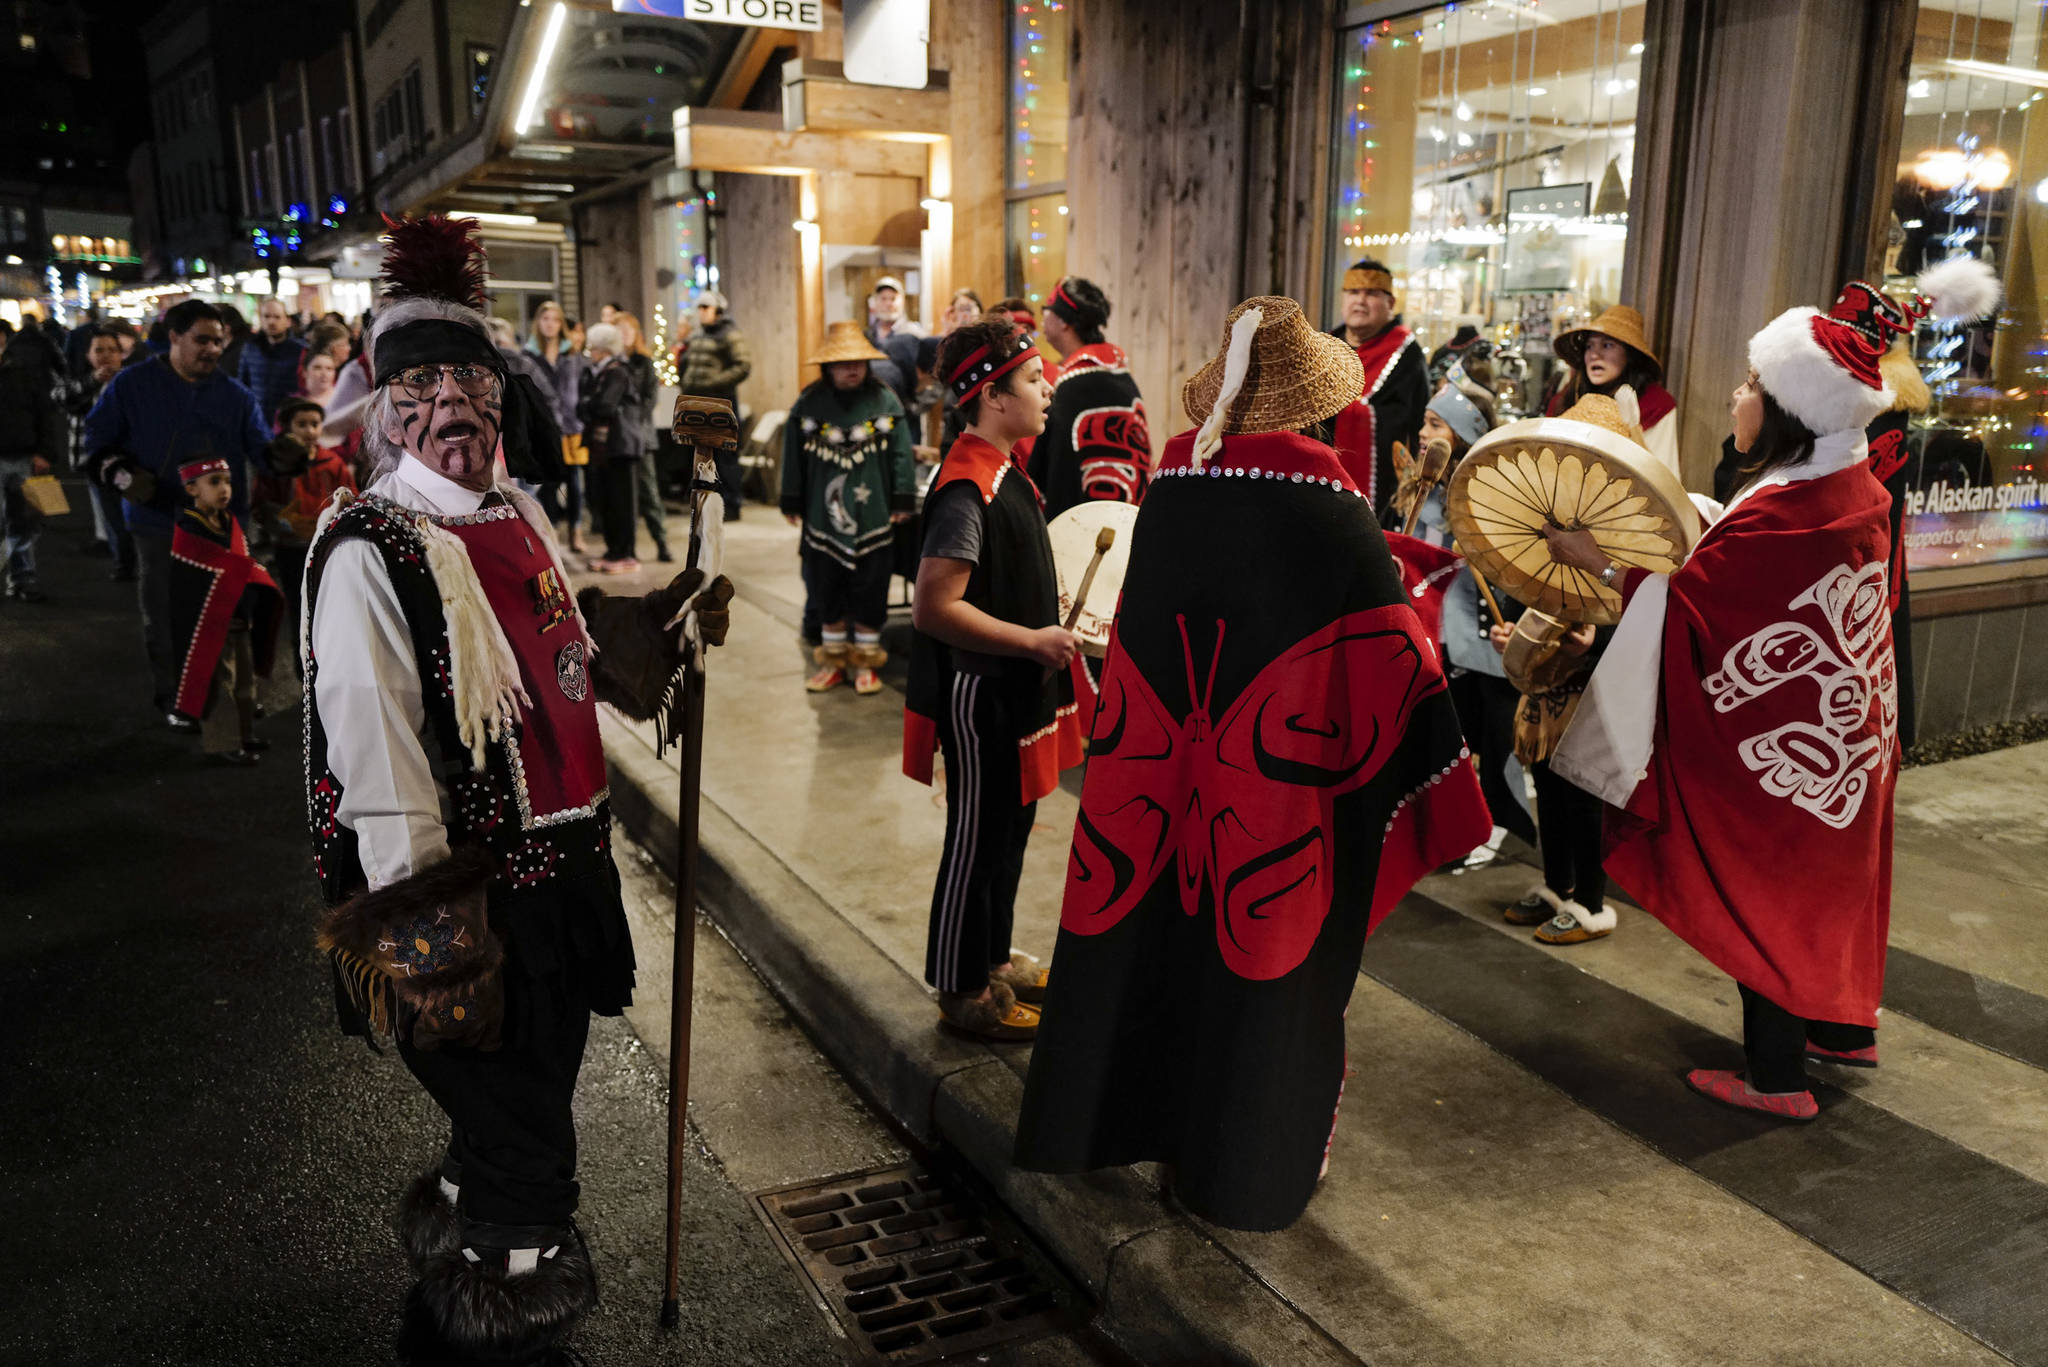 Walter Soboleff, left, sings with the Yees ku.oo Dancers on Front Street during Gallery Walk on Friday, Dec. 6, 2019. (Michael Penn | Juneau Empire)